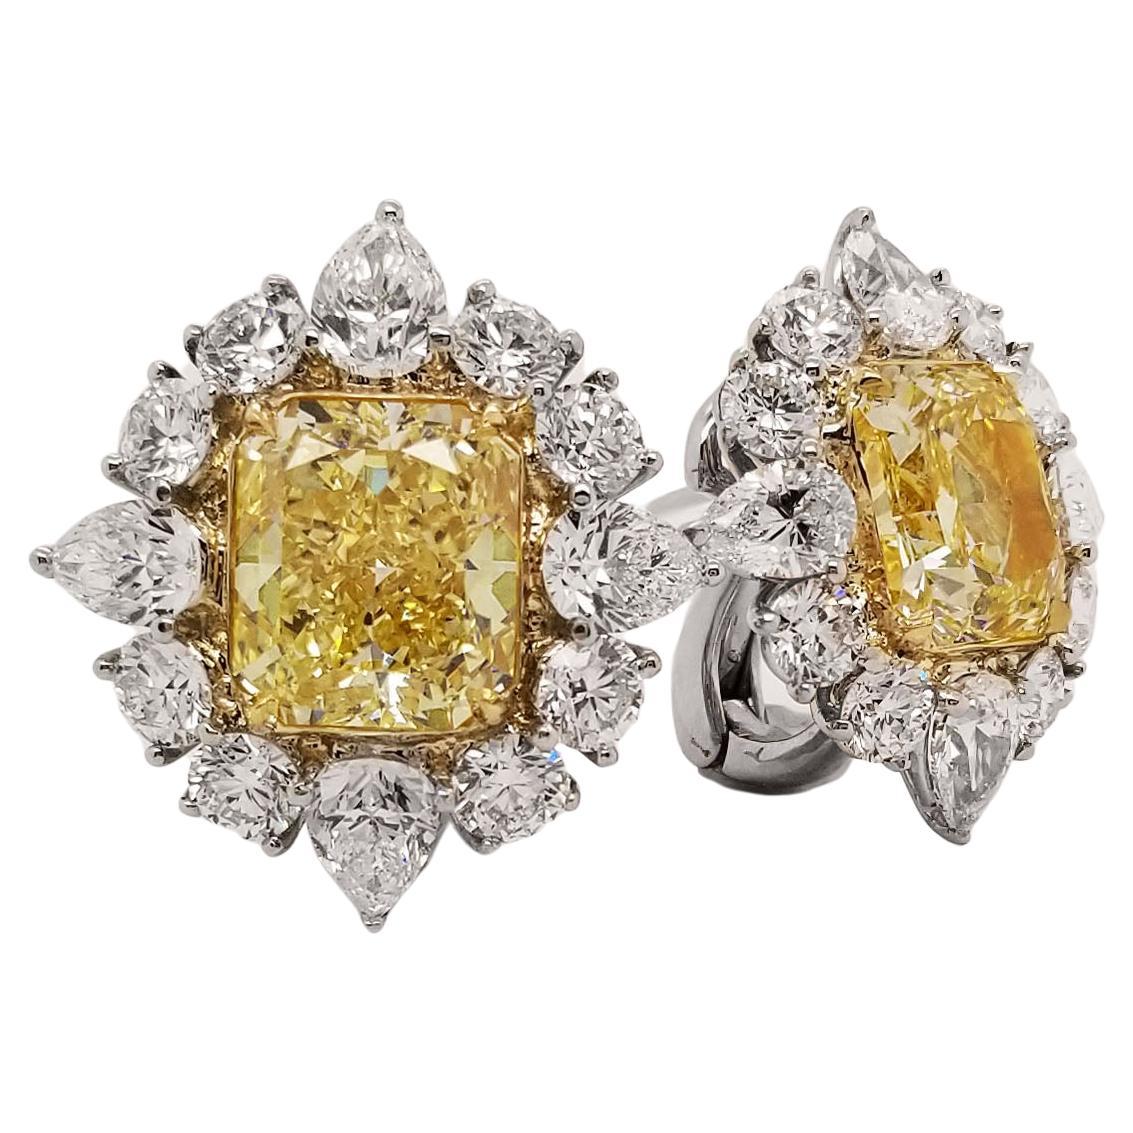 Scarselli 18k & Platinum Earrings 3 Carat Fancy Intense Yellow Each GIA For Sale